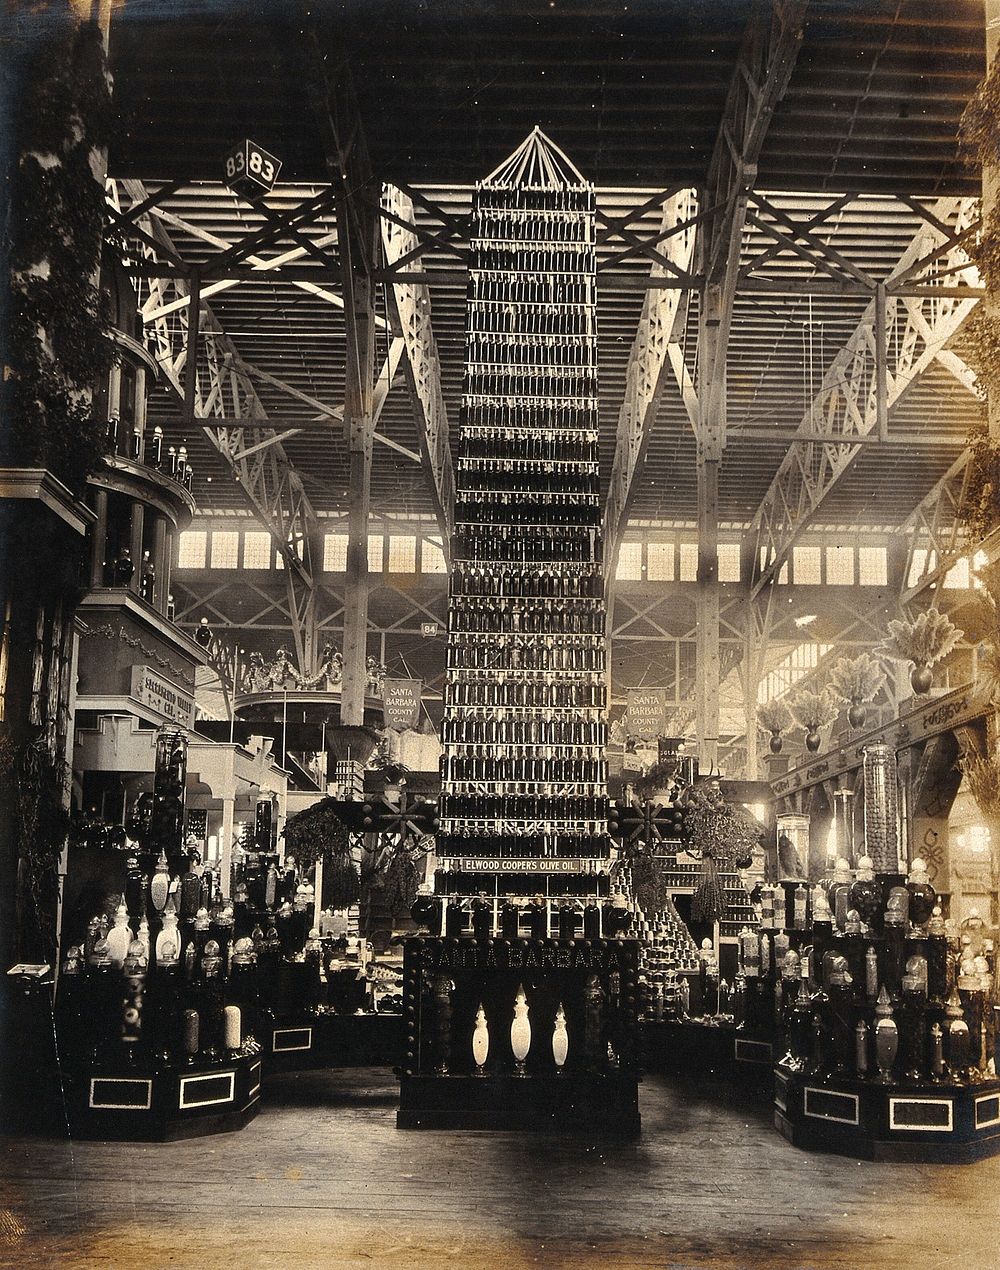 The 1904 World's Fair, St. Louis, Missouri: the Palace of Agriculture: a tower of olive oil bottles produced by Elwood…